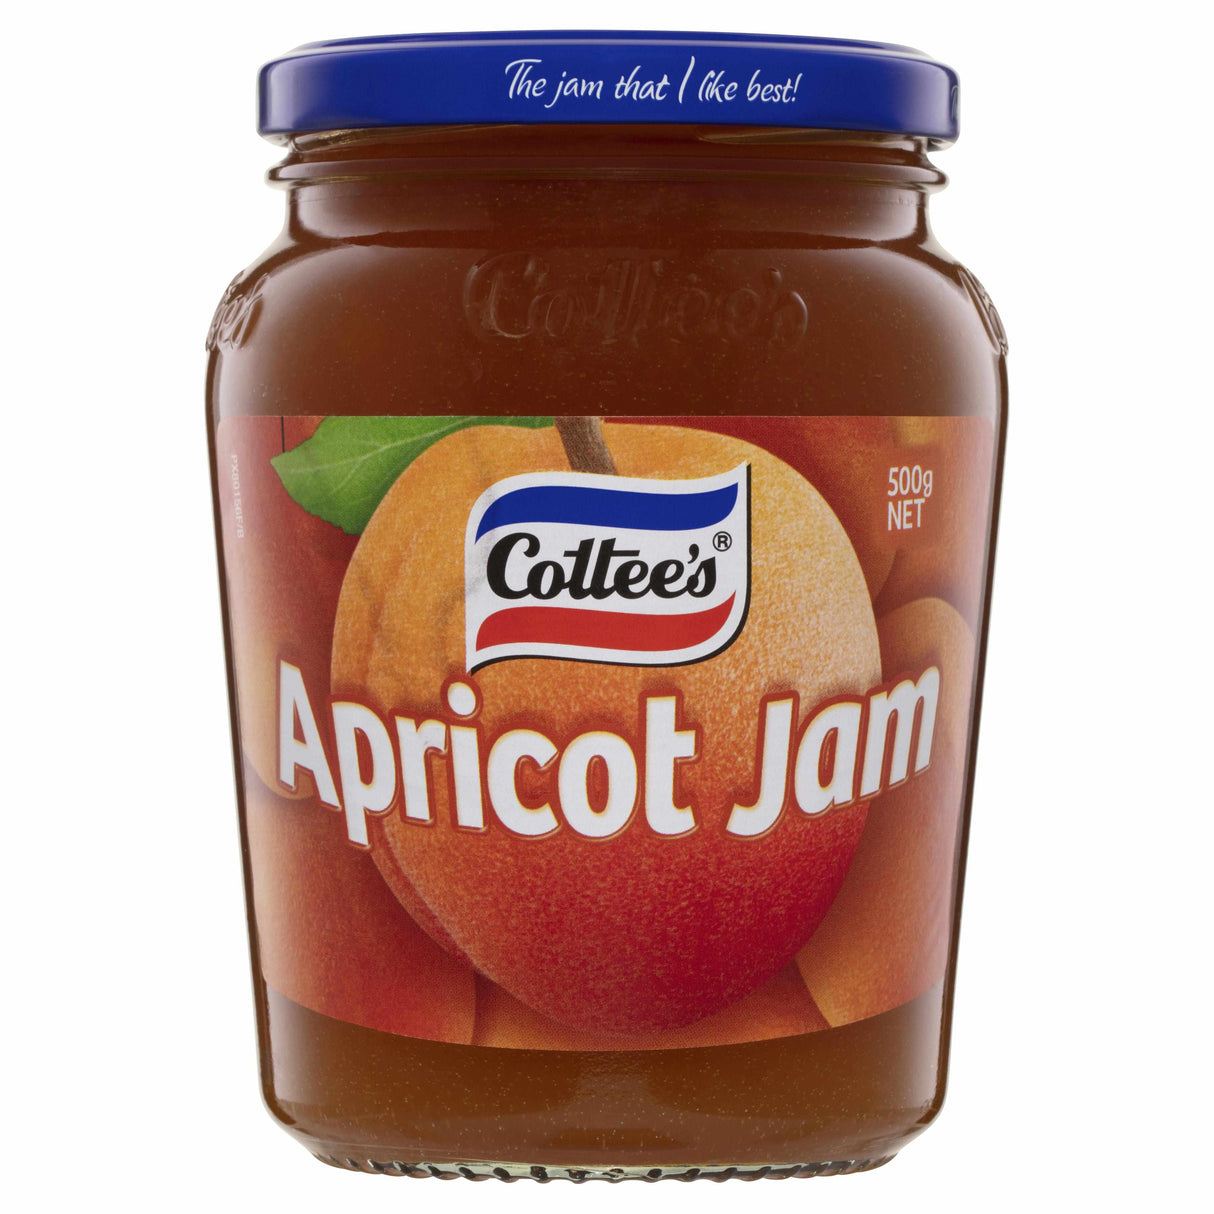 Cottee's Apricot Jam 500g